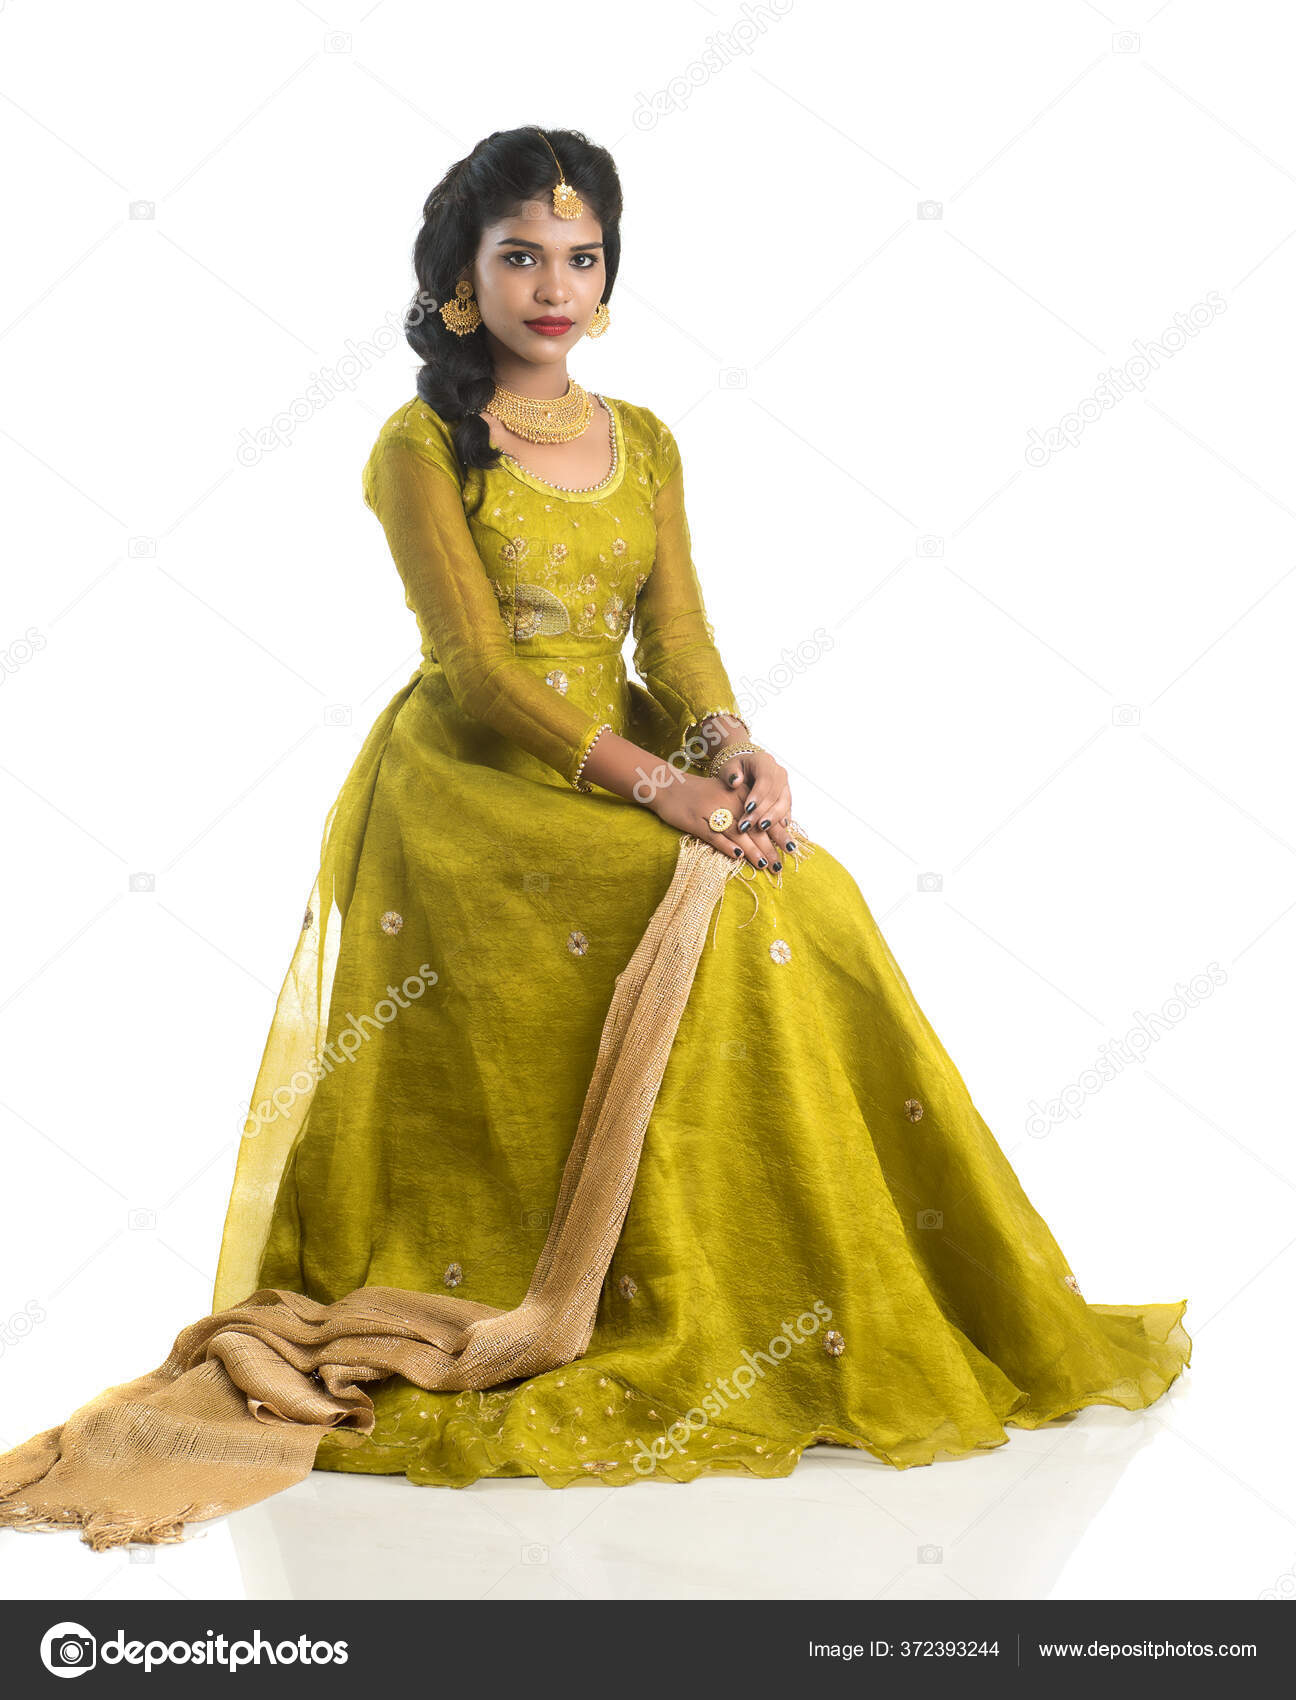 Indian Poses: Over 164,256 Royalty-Free Licensable Stock Photos |  Shutterstock